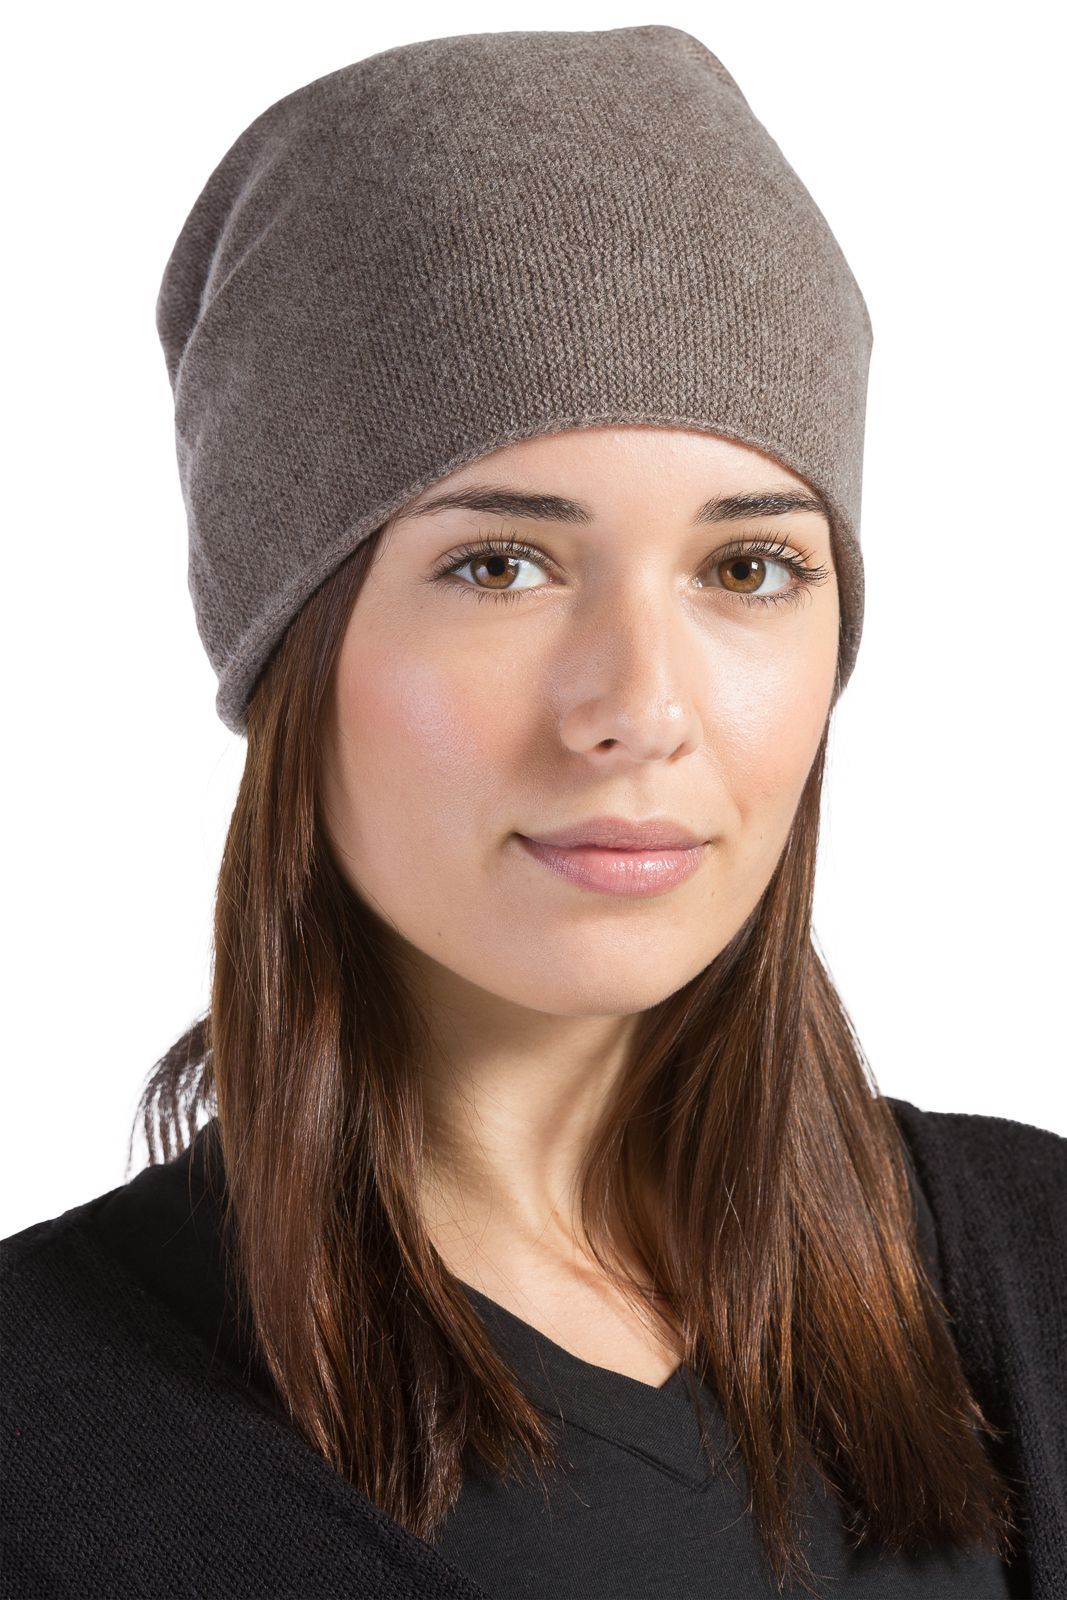 Fishers Finery Cappuccino, 100% cashmere women's slouchy beanie hat made from grade 6A, de-haired, 2-ply yarn that's pill-resistant and super soft